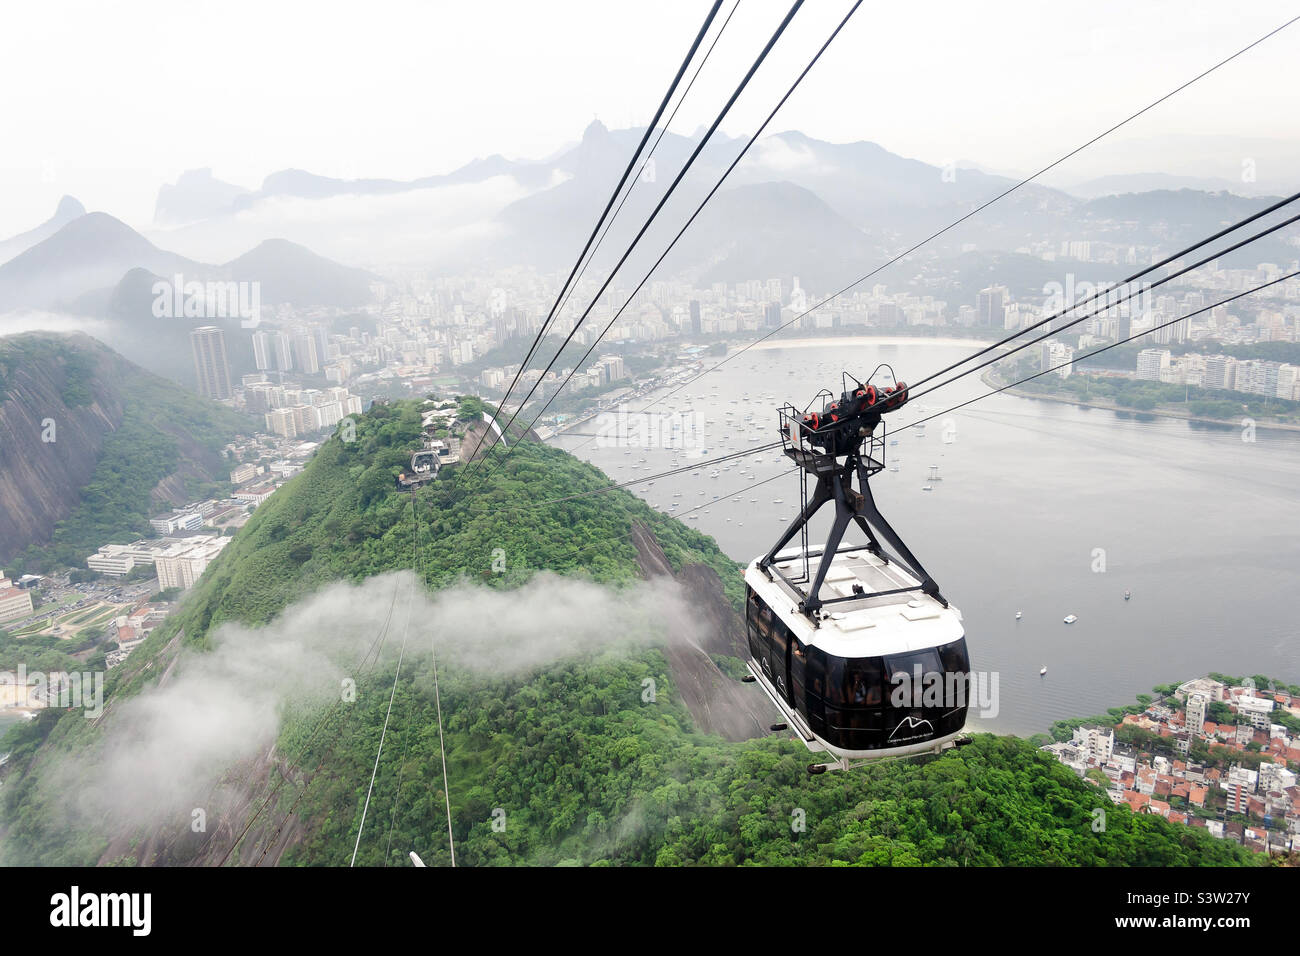 Foggy morning in Rio de Janeiro, Brazil. View from the Sugarloaf mountain. Stock Photo